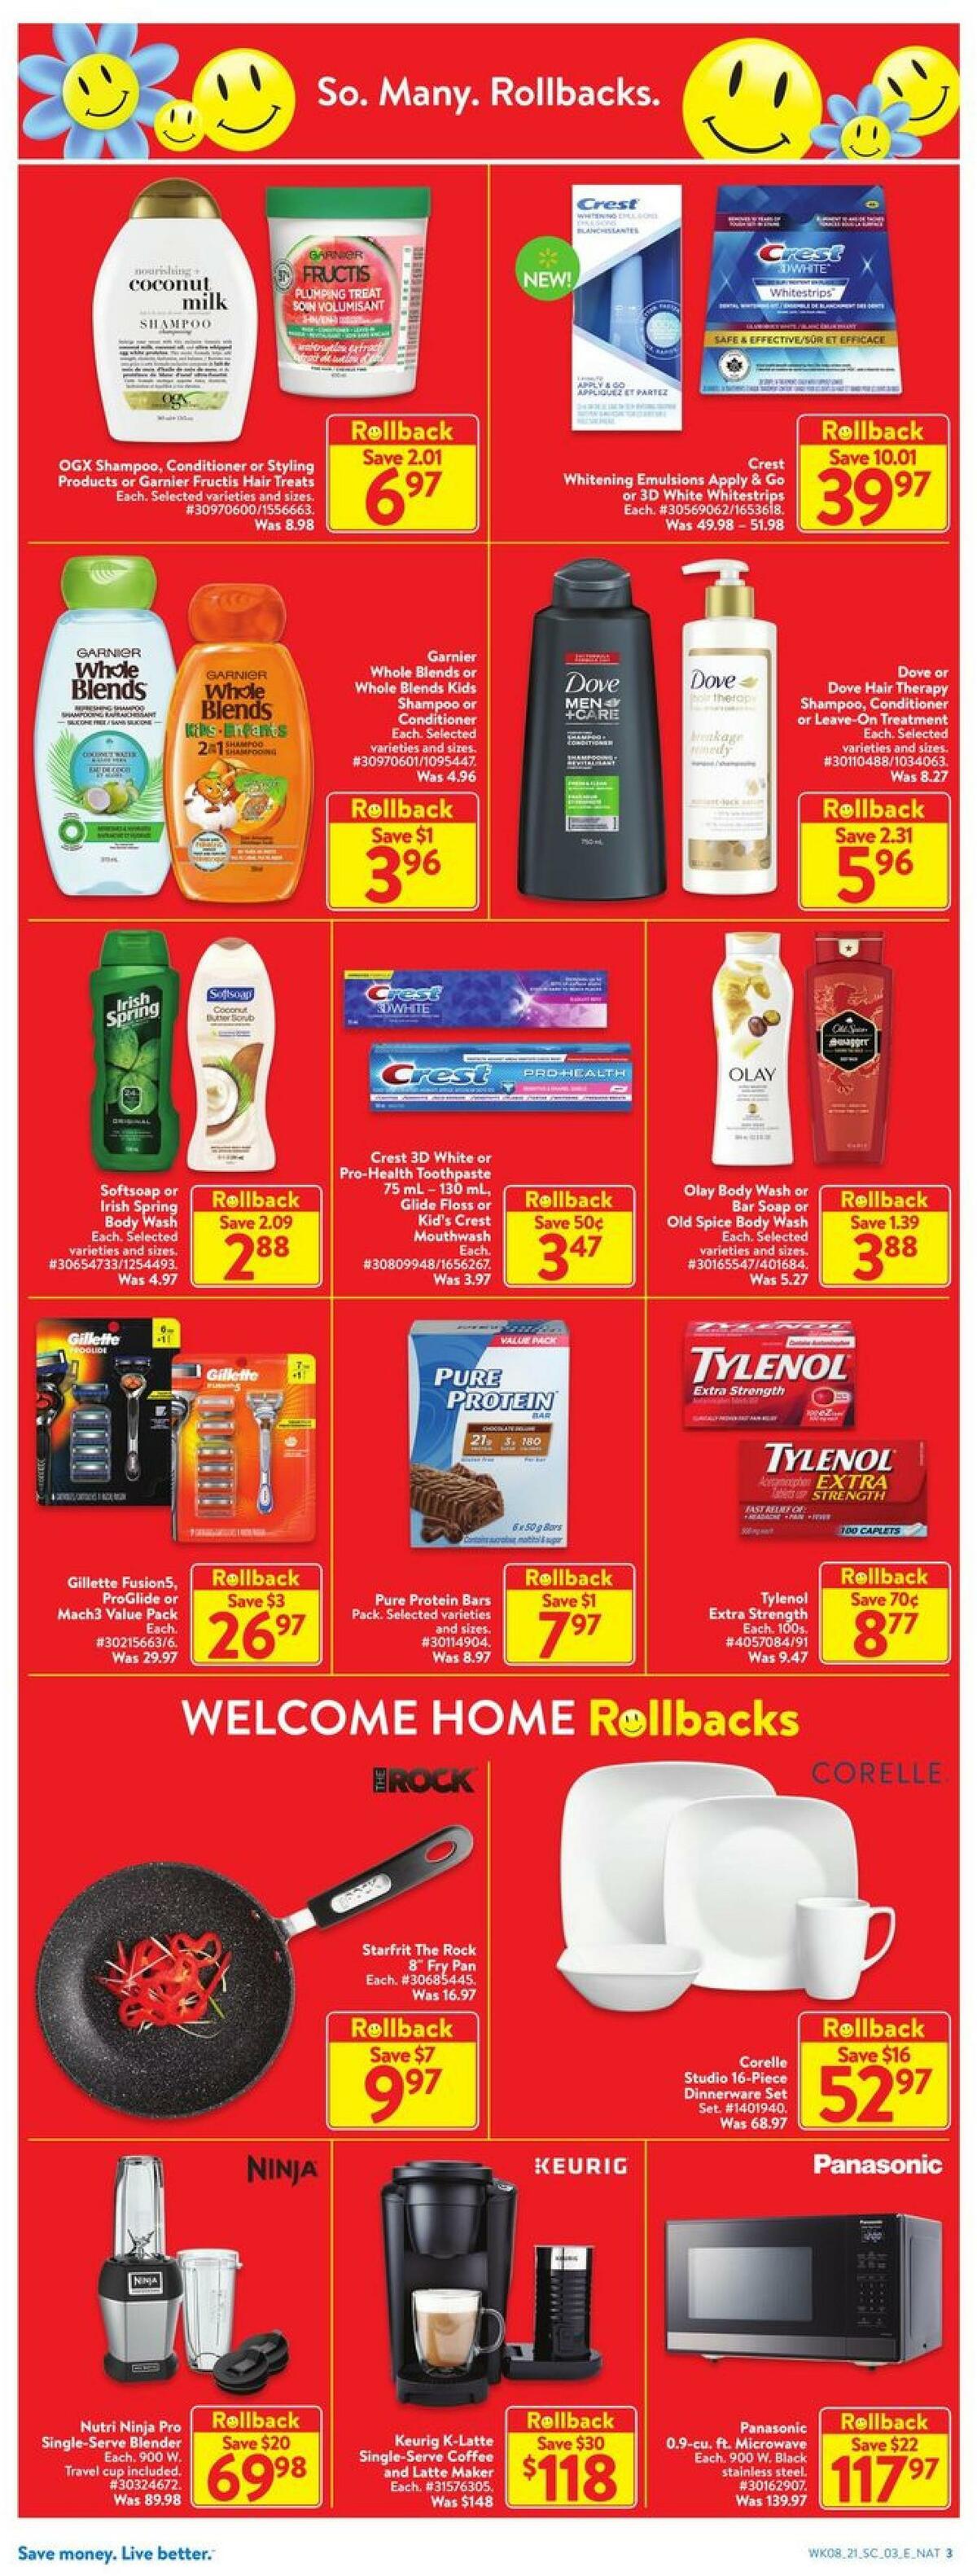 Walmart Flyer from March 18